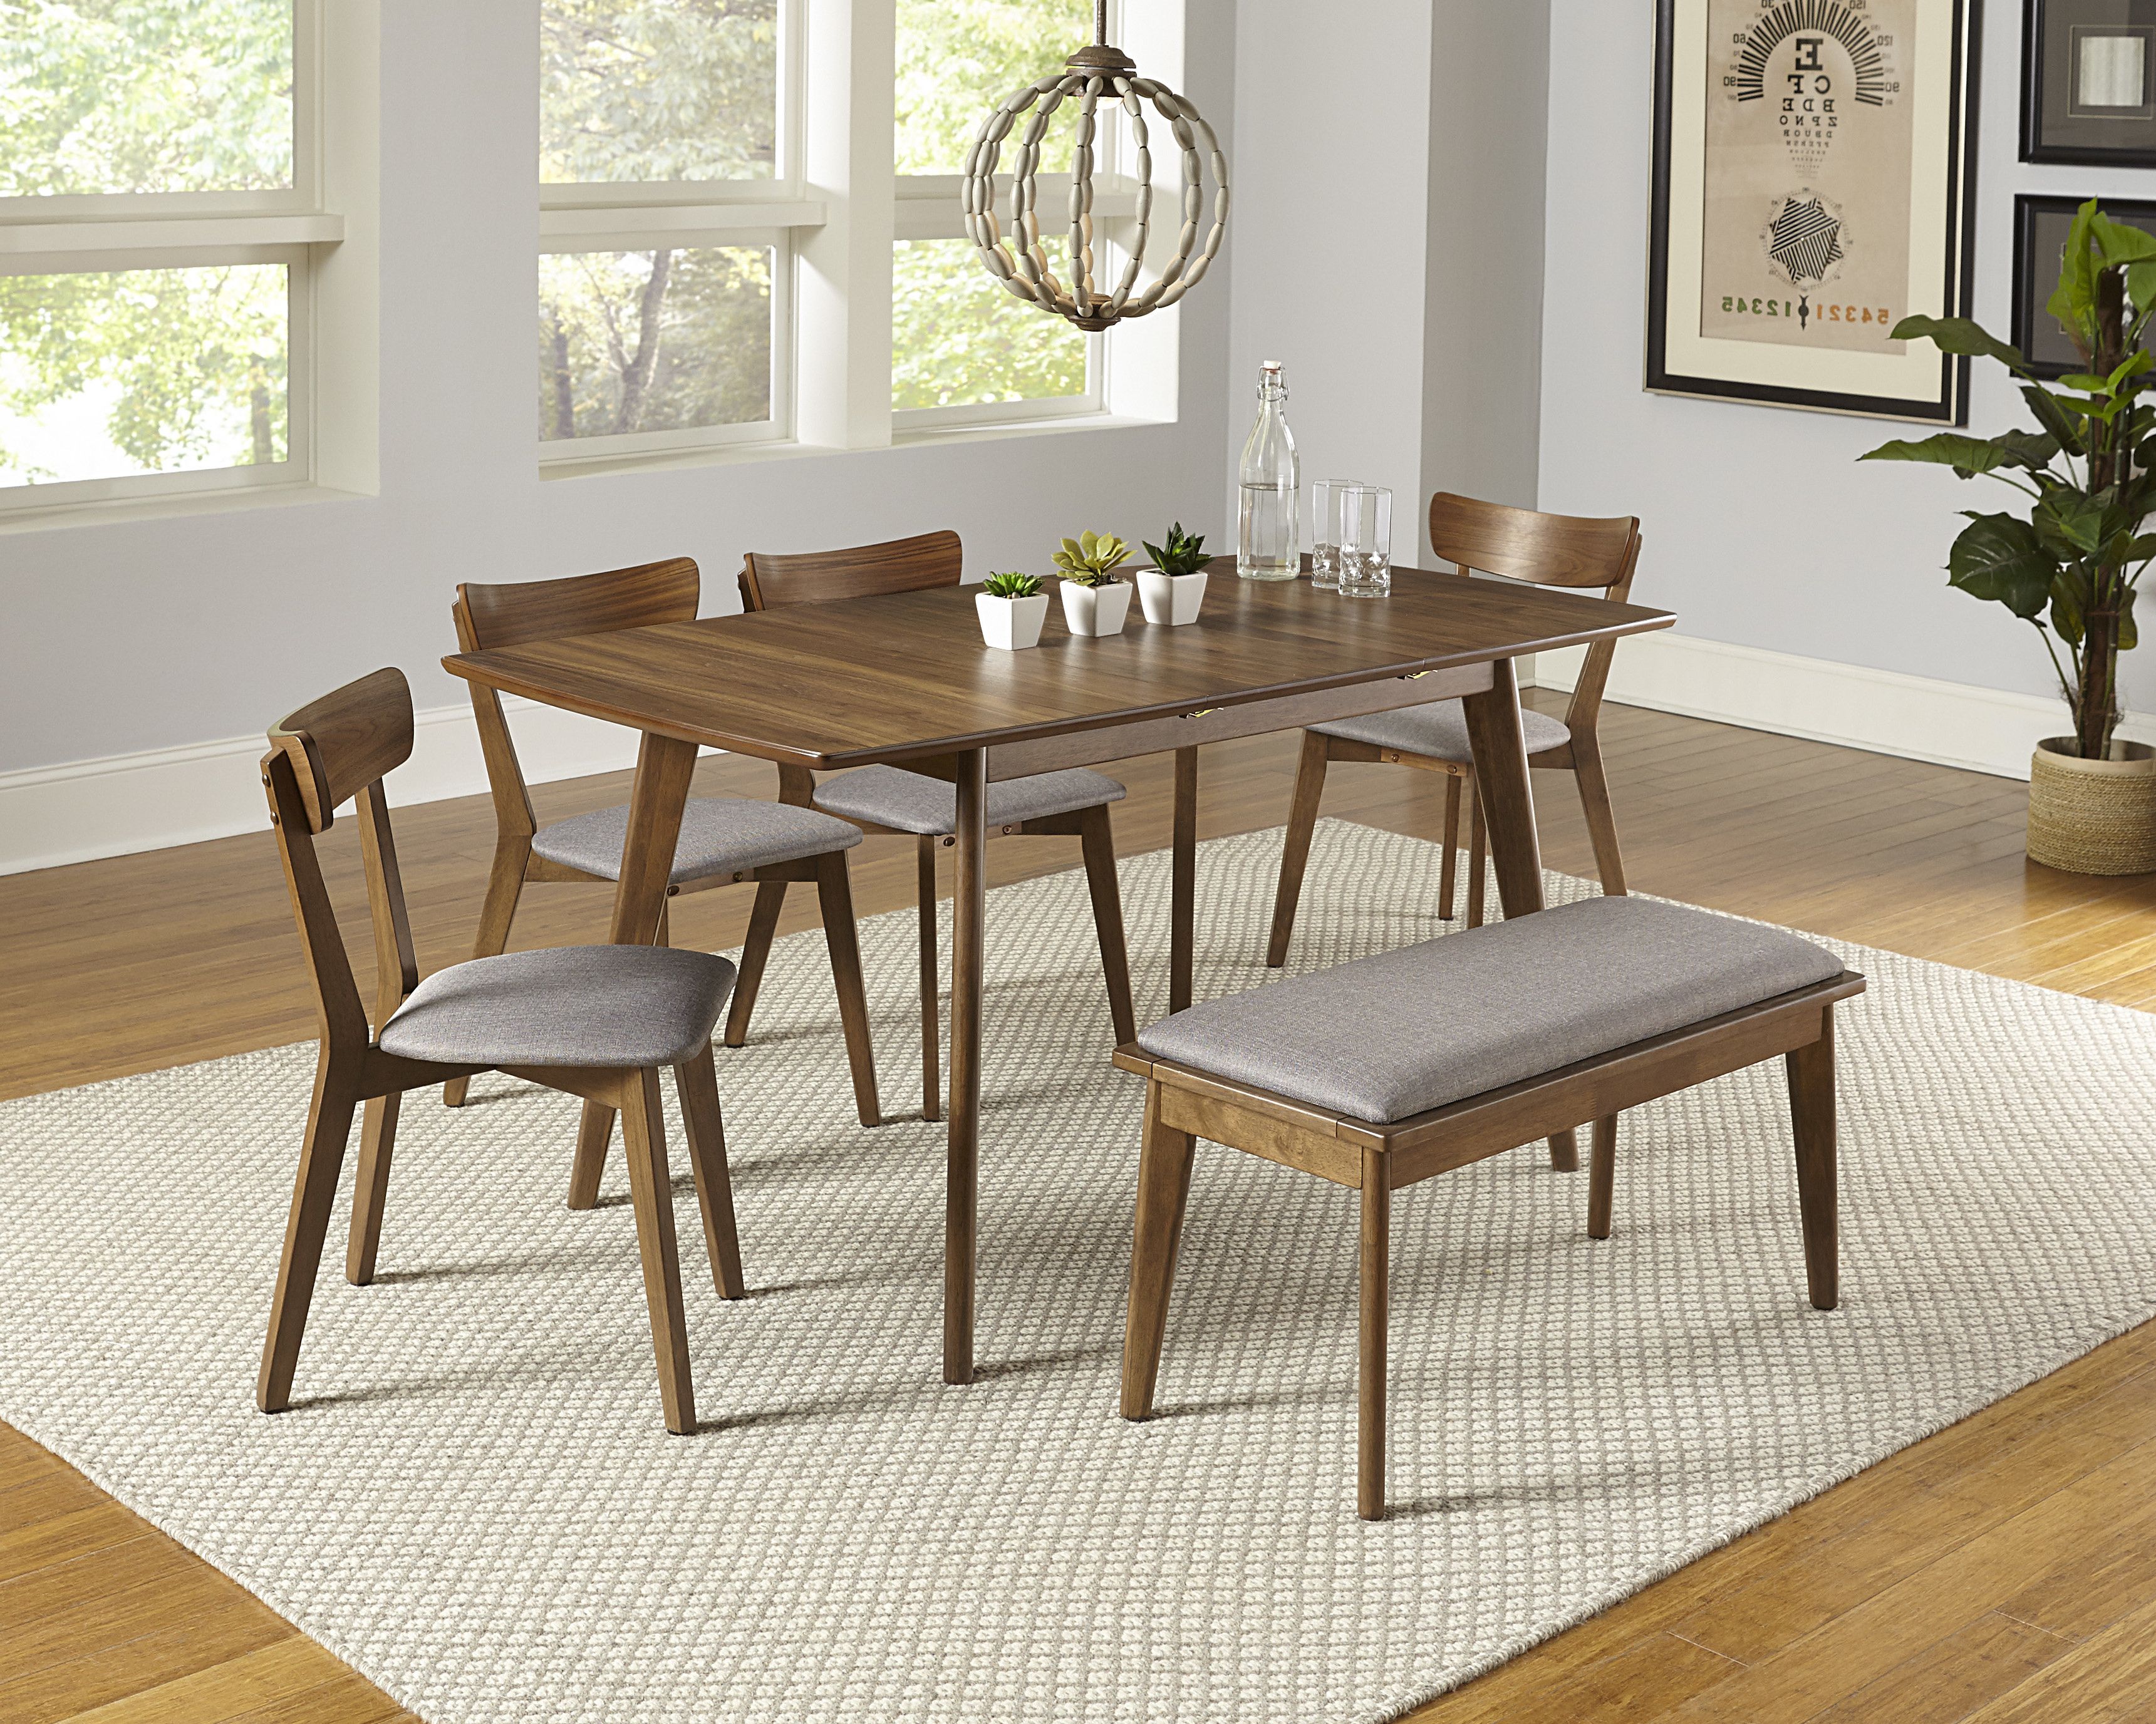 Kerley 4 Piece Dining Sets Pertaining To Famous Rockaway 6 Piece Extendable Solid Wood Dining Set (View 13 of 20)